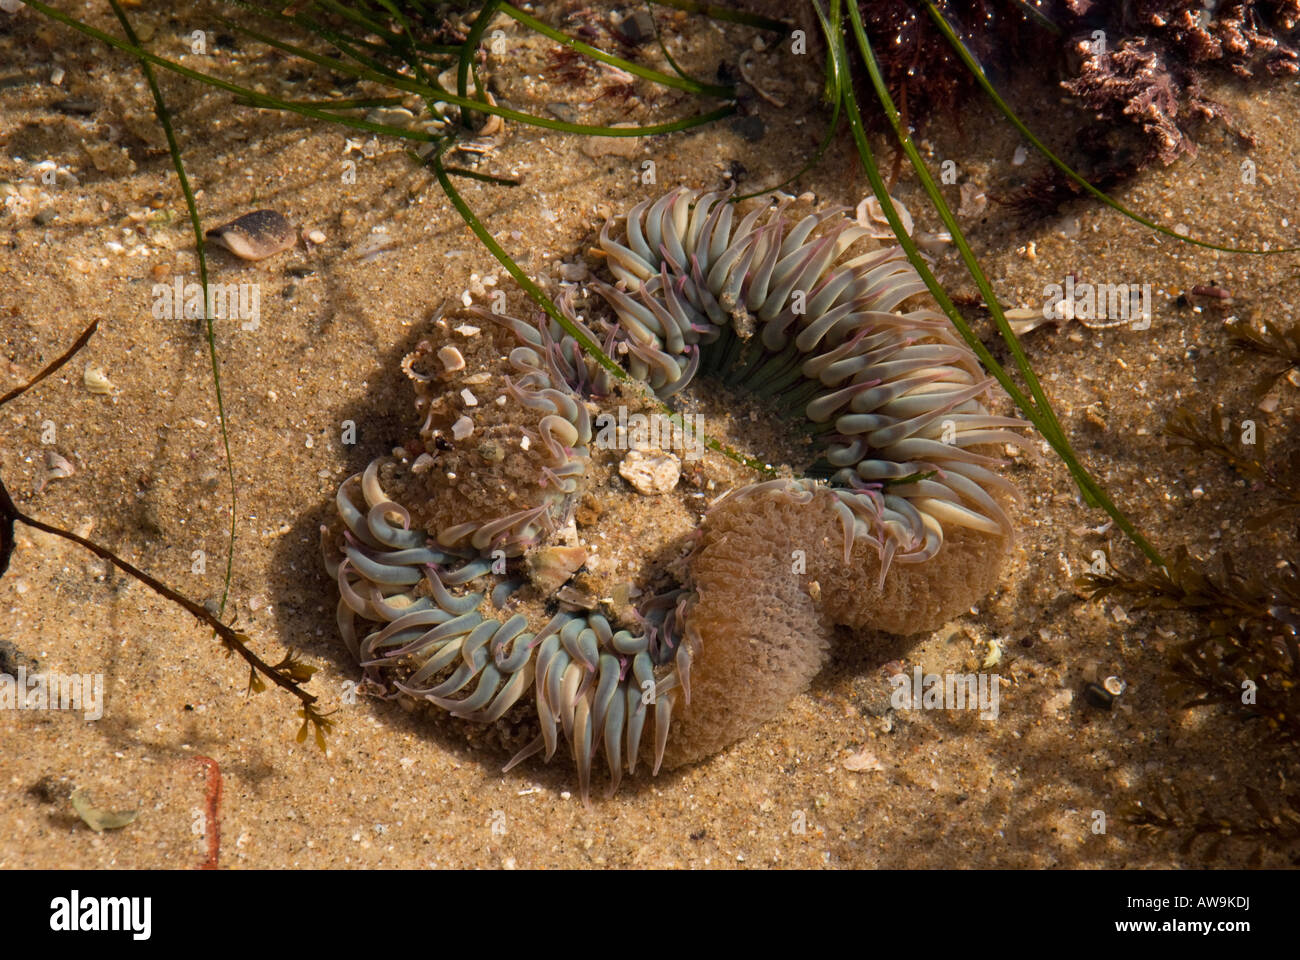 Sea anemone in a Pacific tidal pool Stock Photo